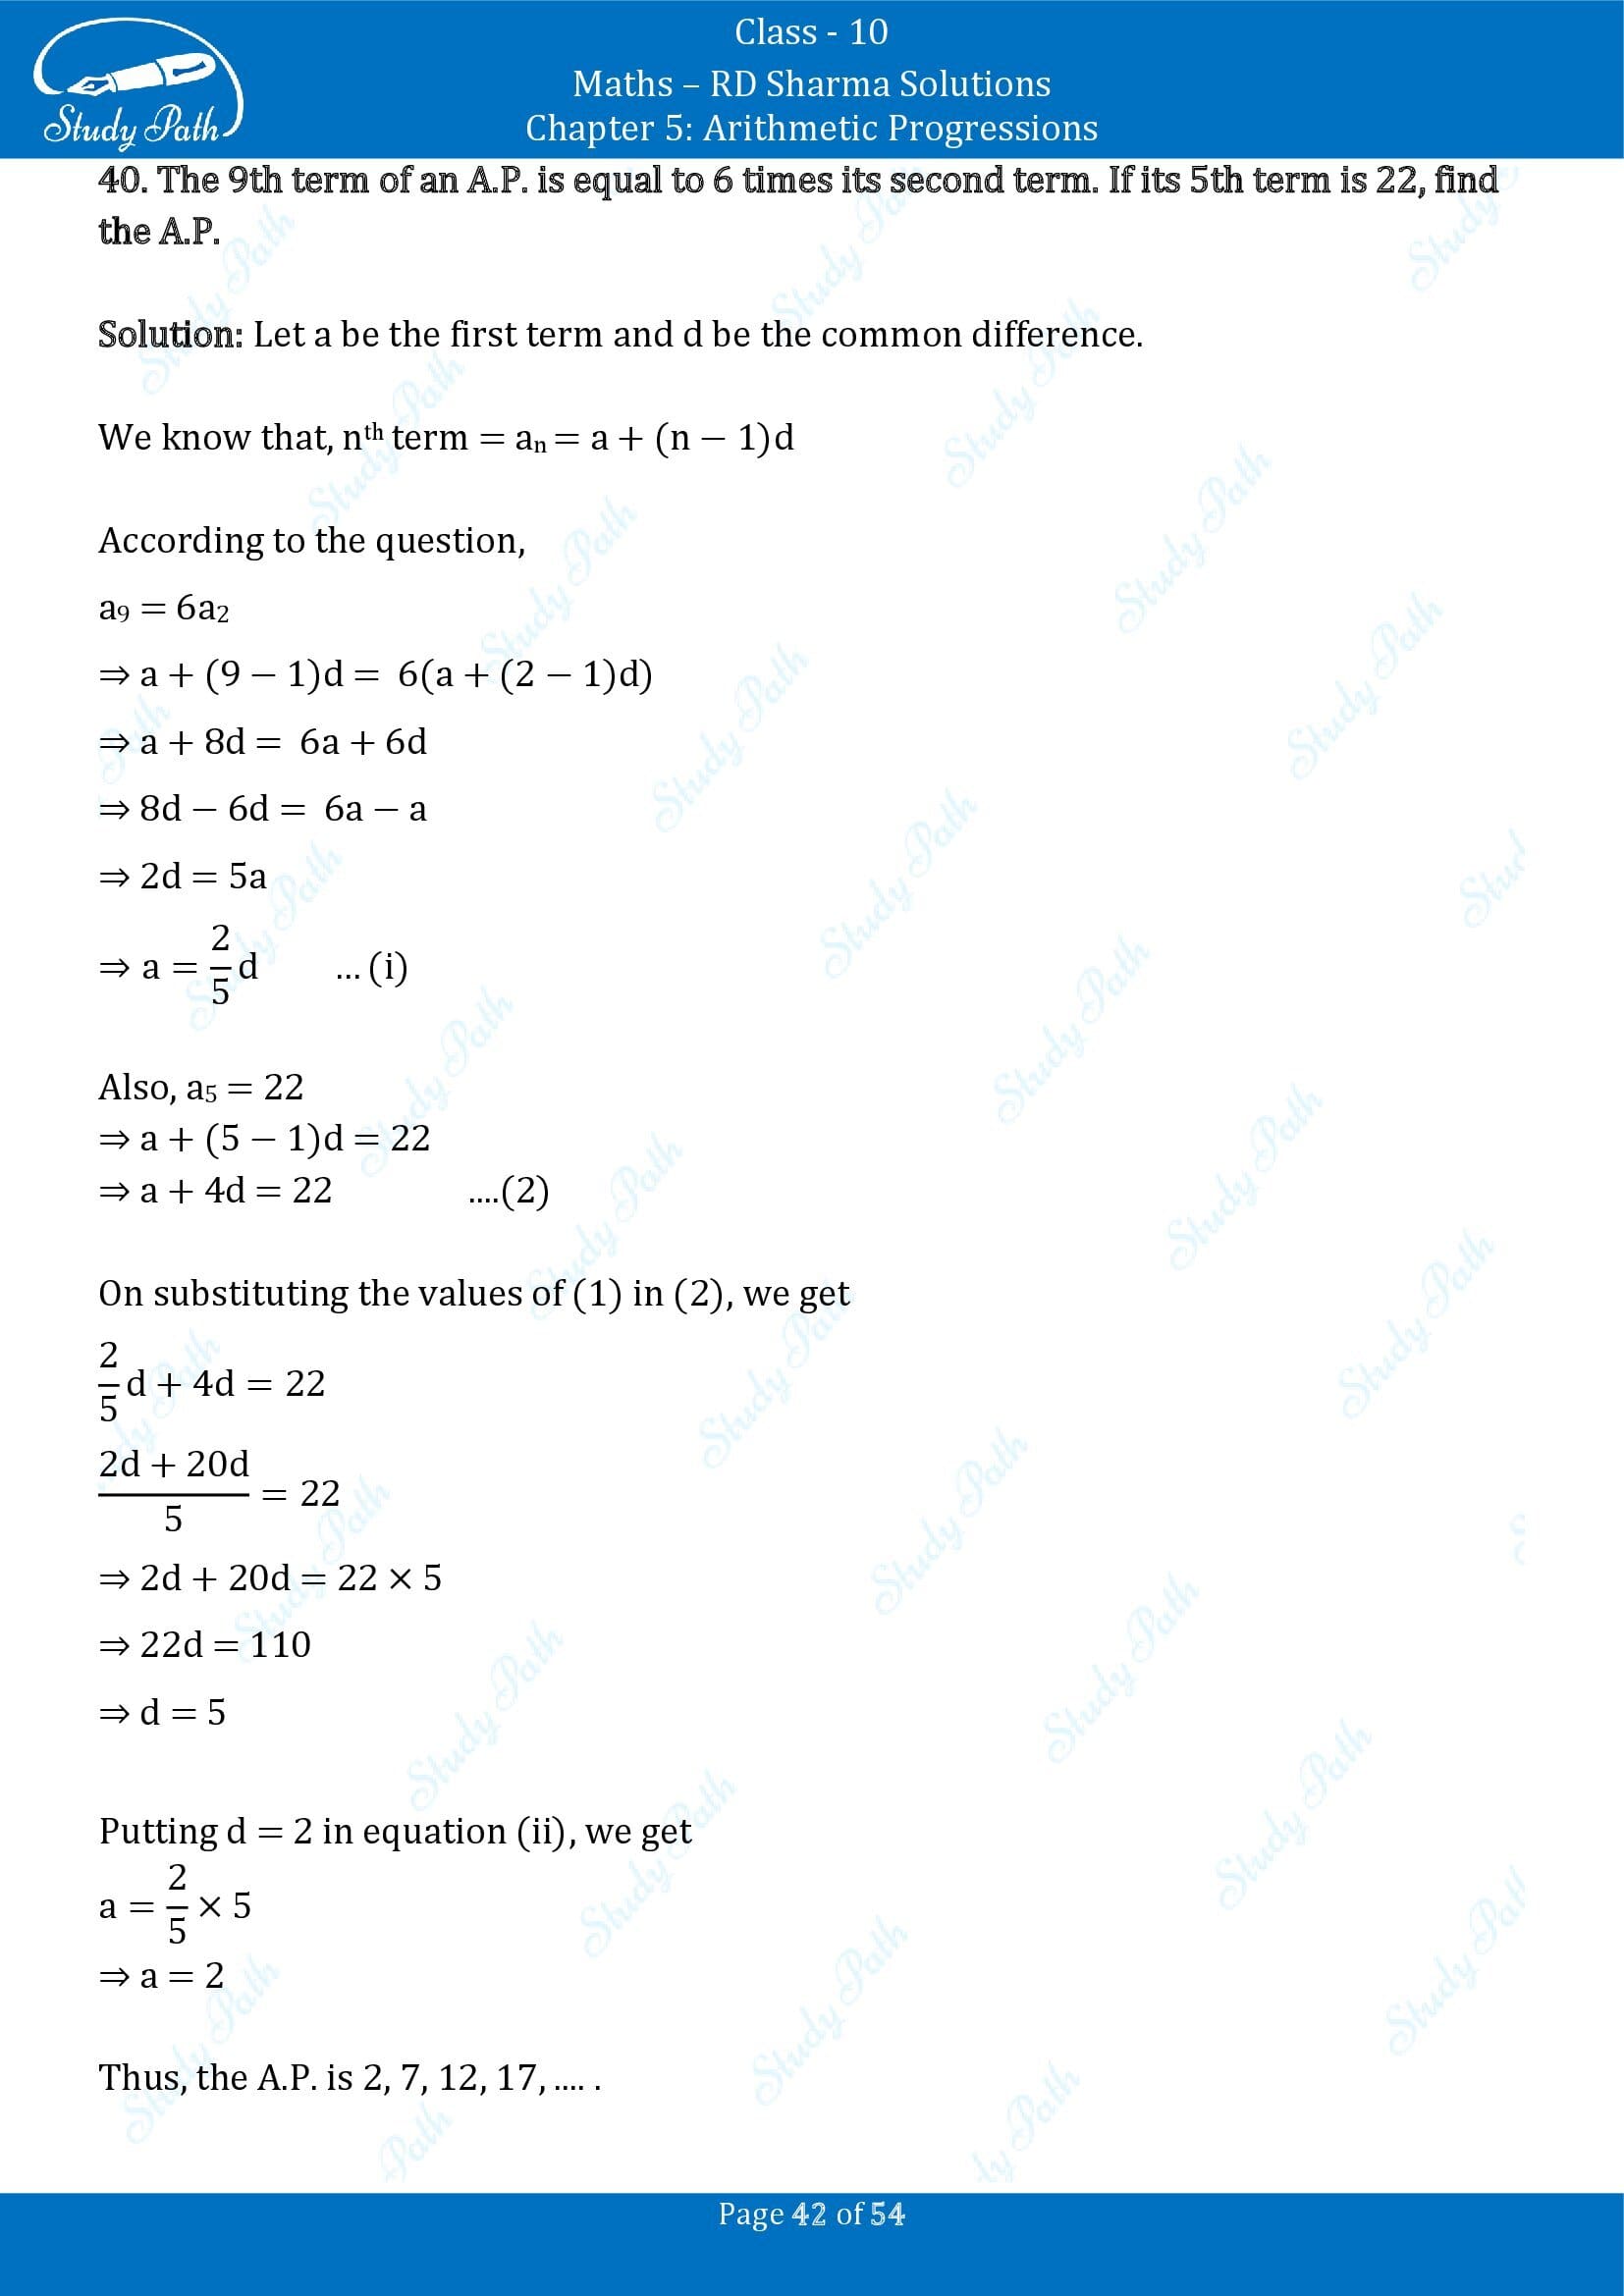 RD Sharma Solutions Class 10 Chapter 5 Arithmetic Progressions Exercise 5.4 00042